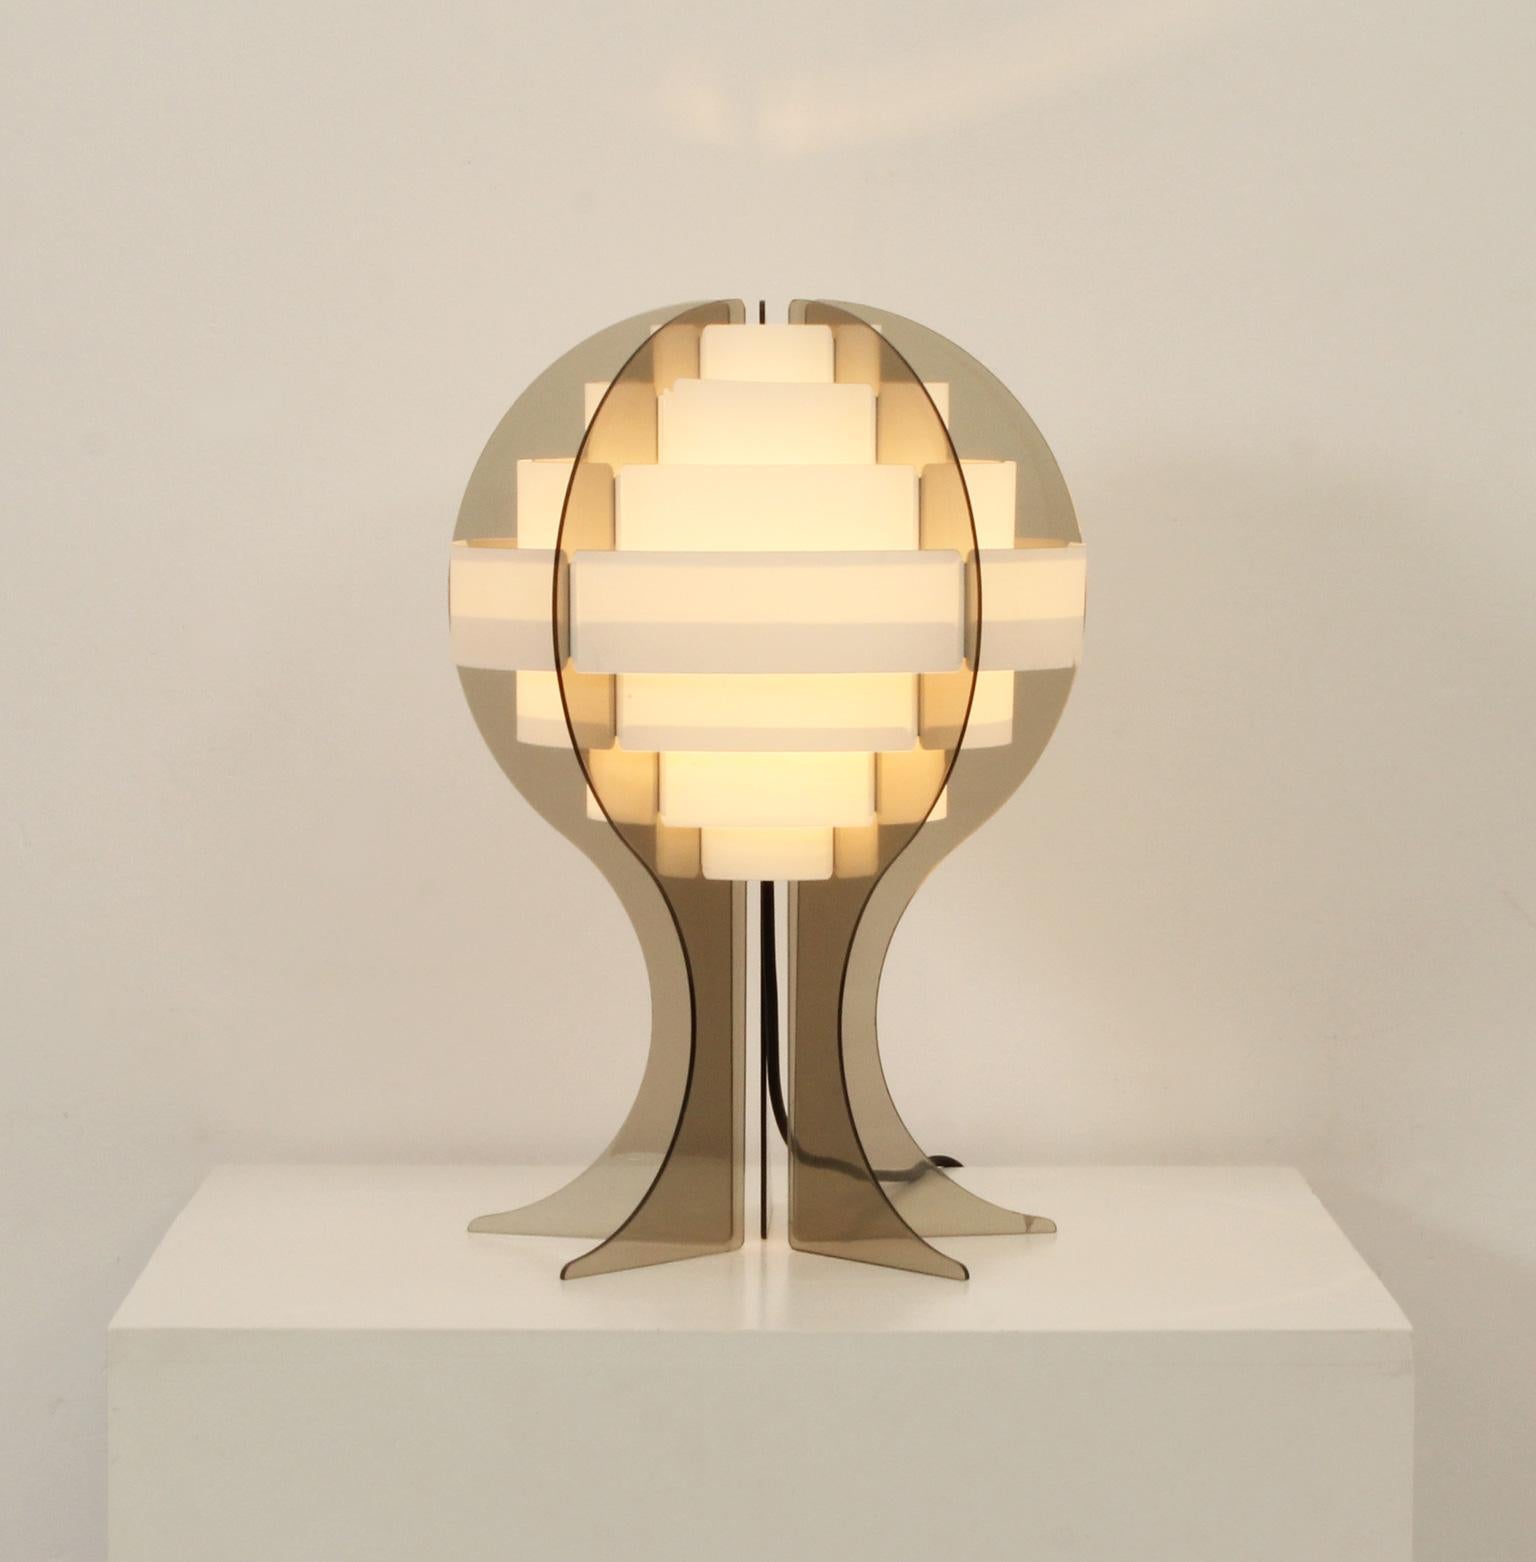 Table lamp designed in 1960's by Flemming Brylle and Preben Jacobsen. Denmark. Made of sheets of smoked methacrylate and white acrylic.